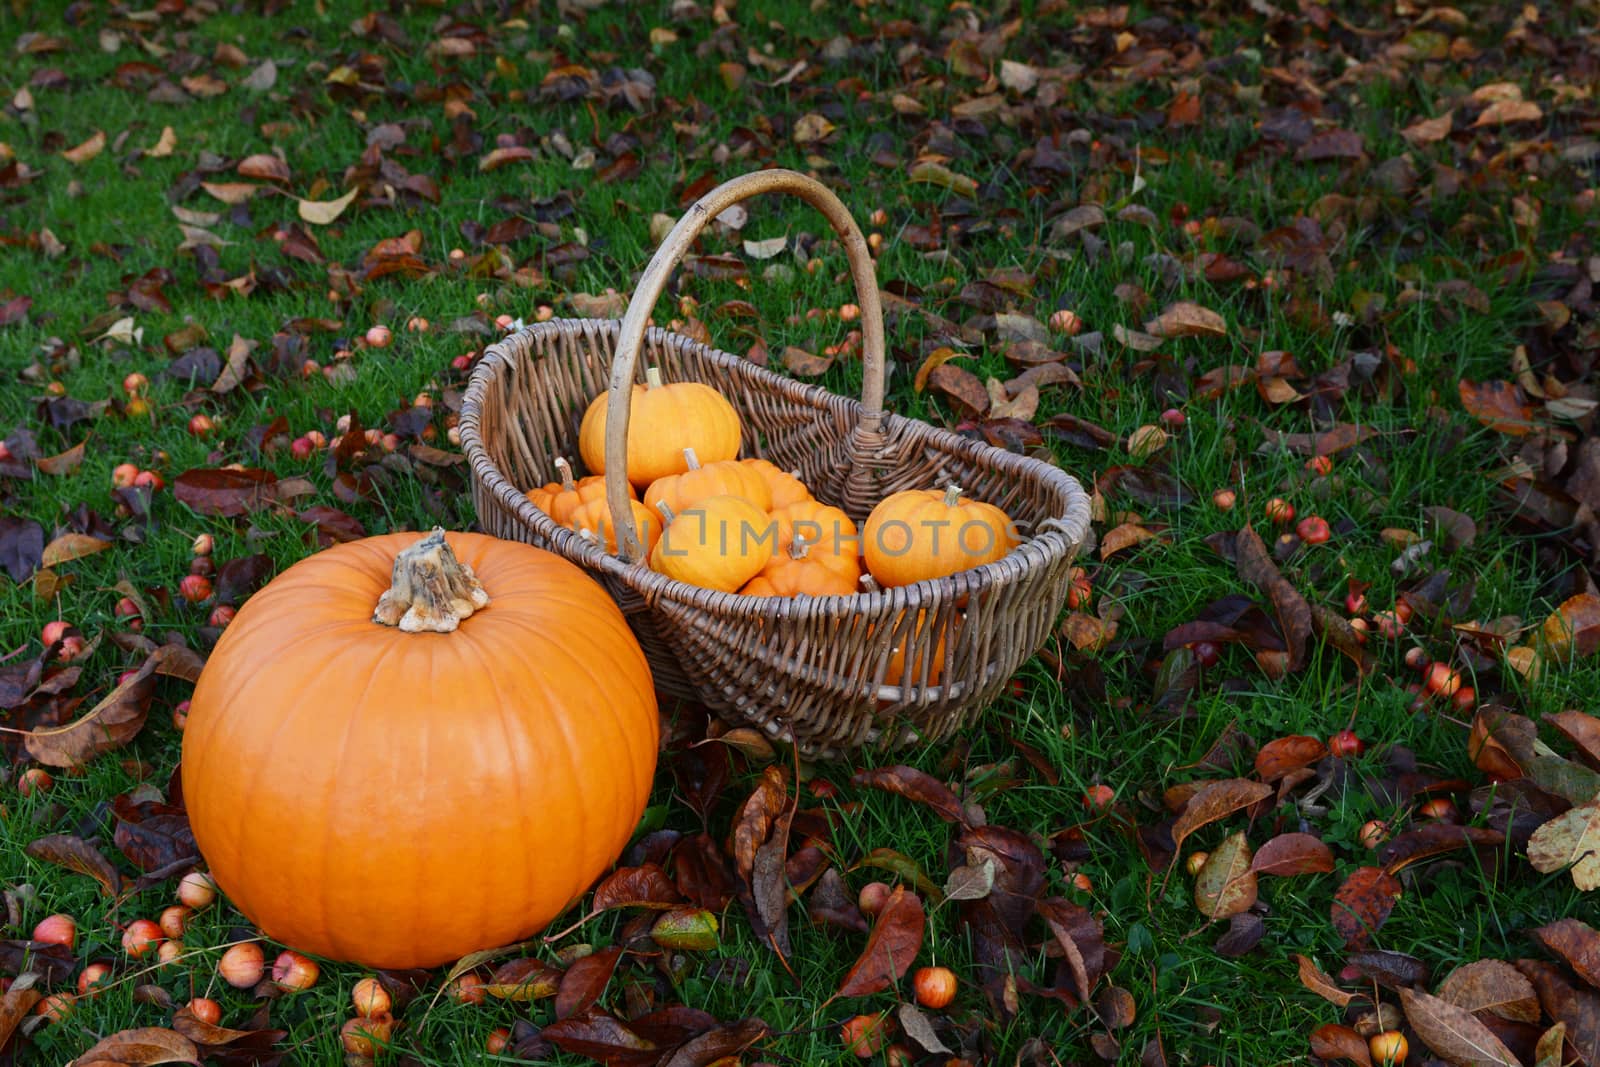 Ripe pumpkin and basket full of mini pumpkins in an autumnal garden covered in fallen leaves and crab apples